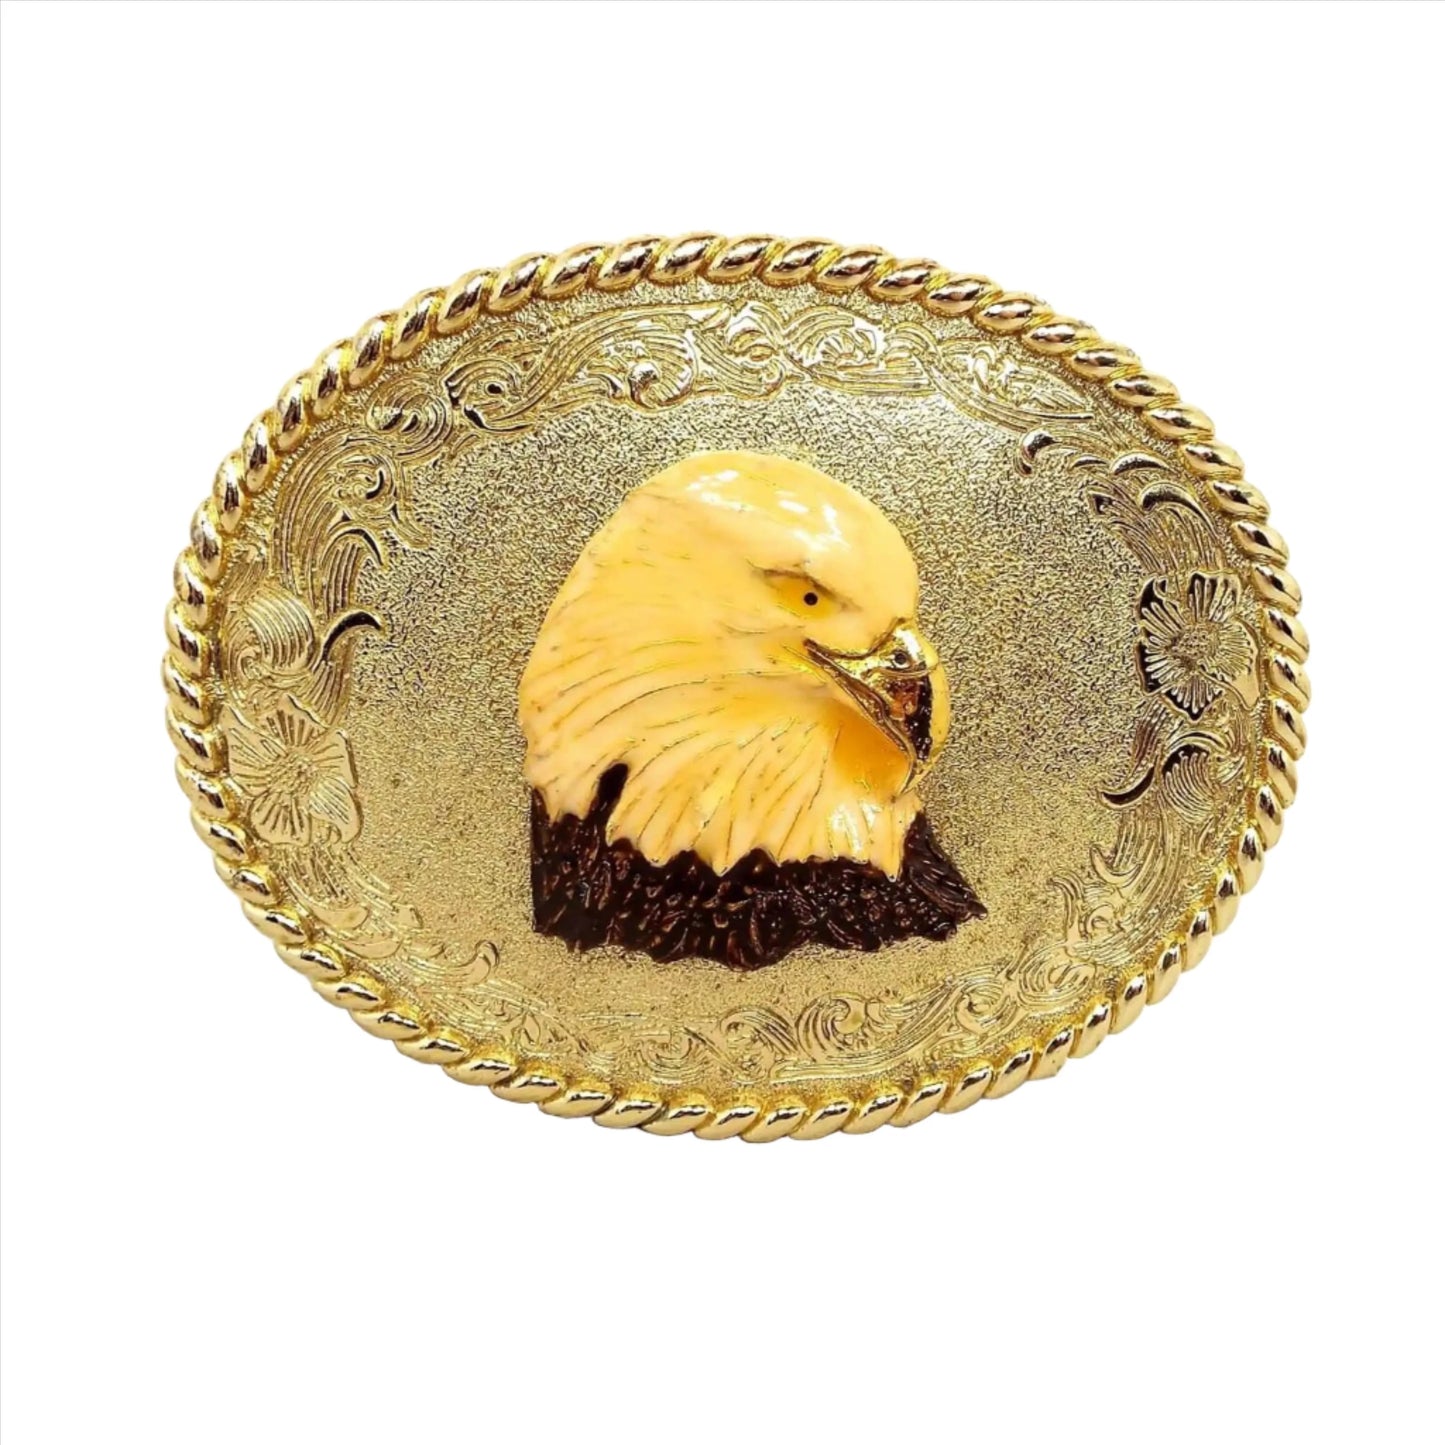 Front view of the retro vintage enameled eagle head belt buckle. The metal is gold tone in color with a floral design around the edge of the oval buckle. In the middle is an enameled bald eagle head with gold tone beak.